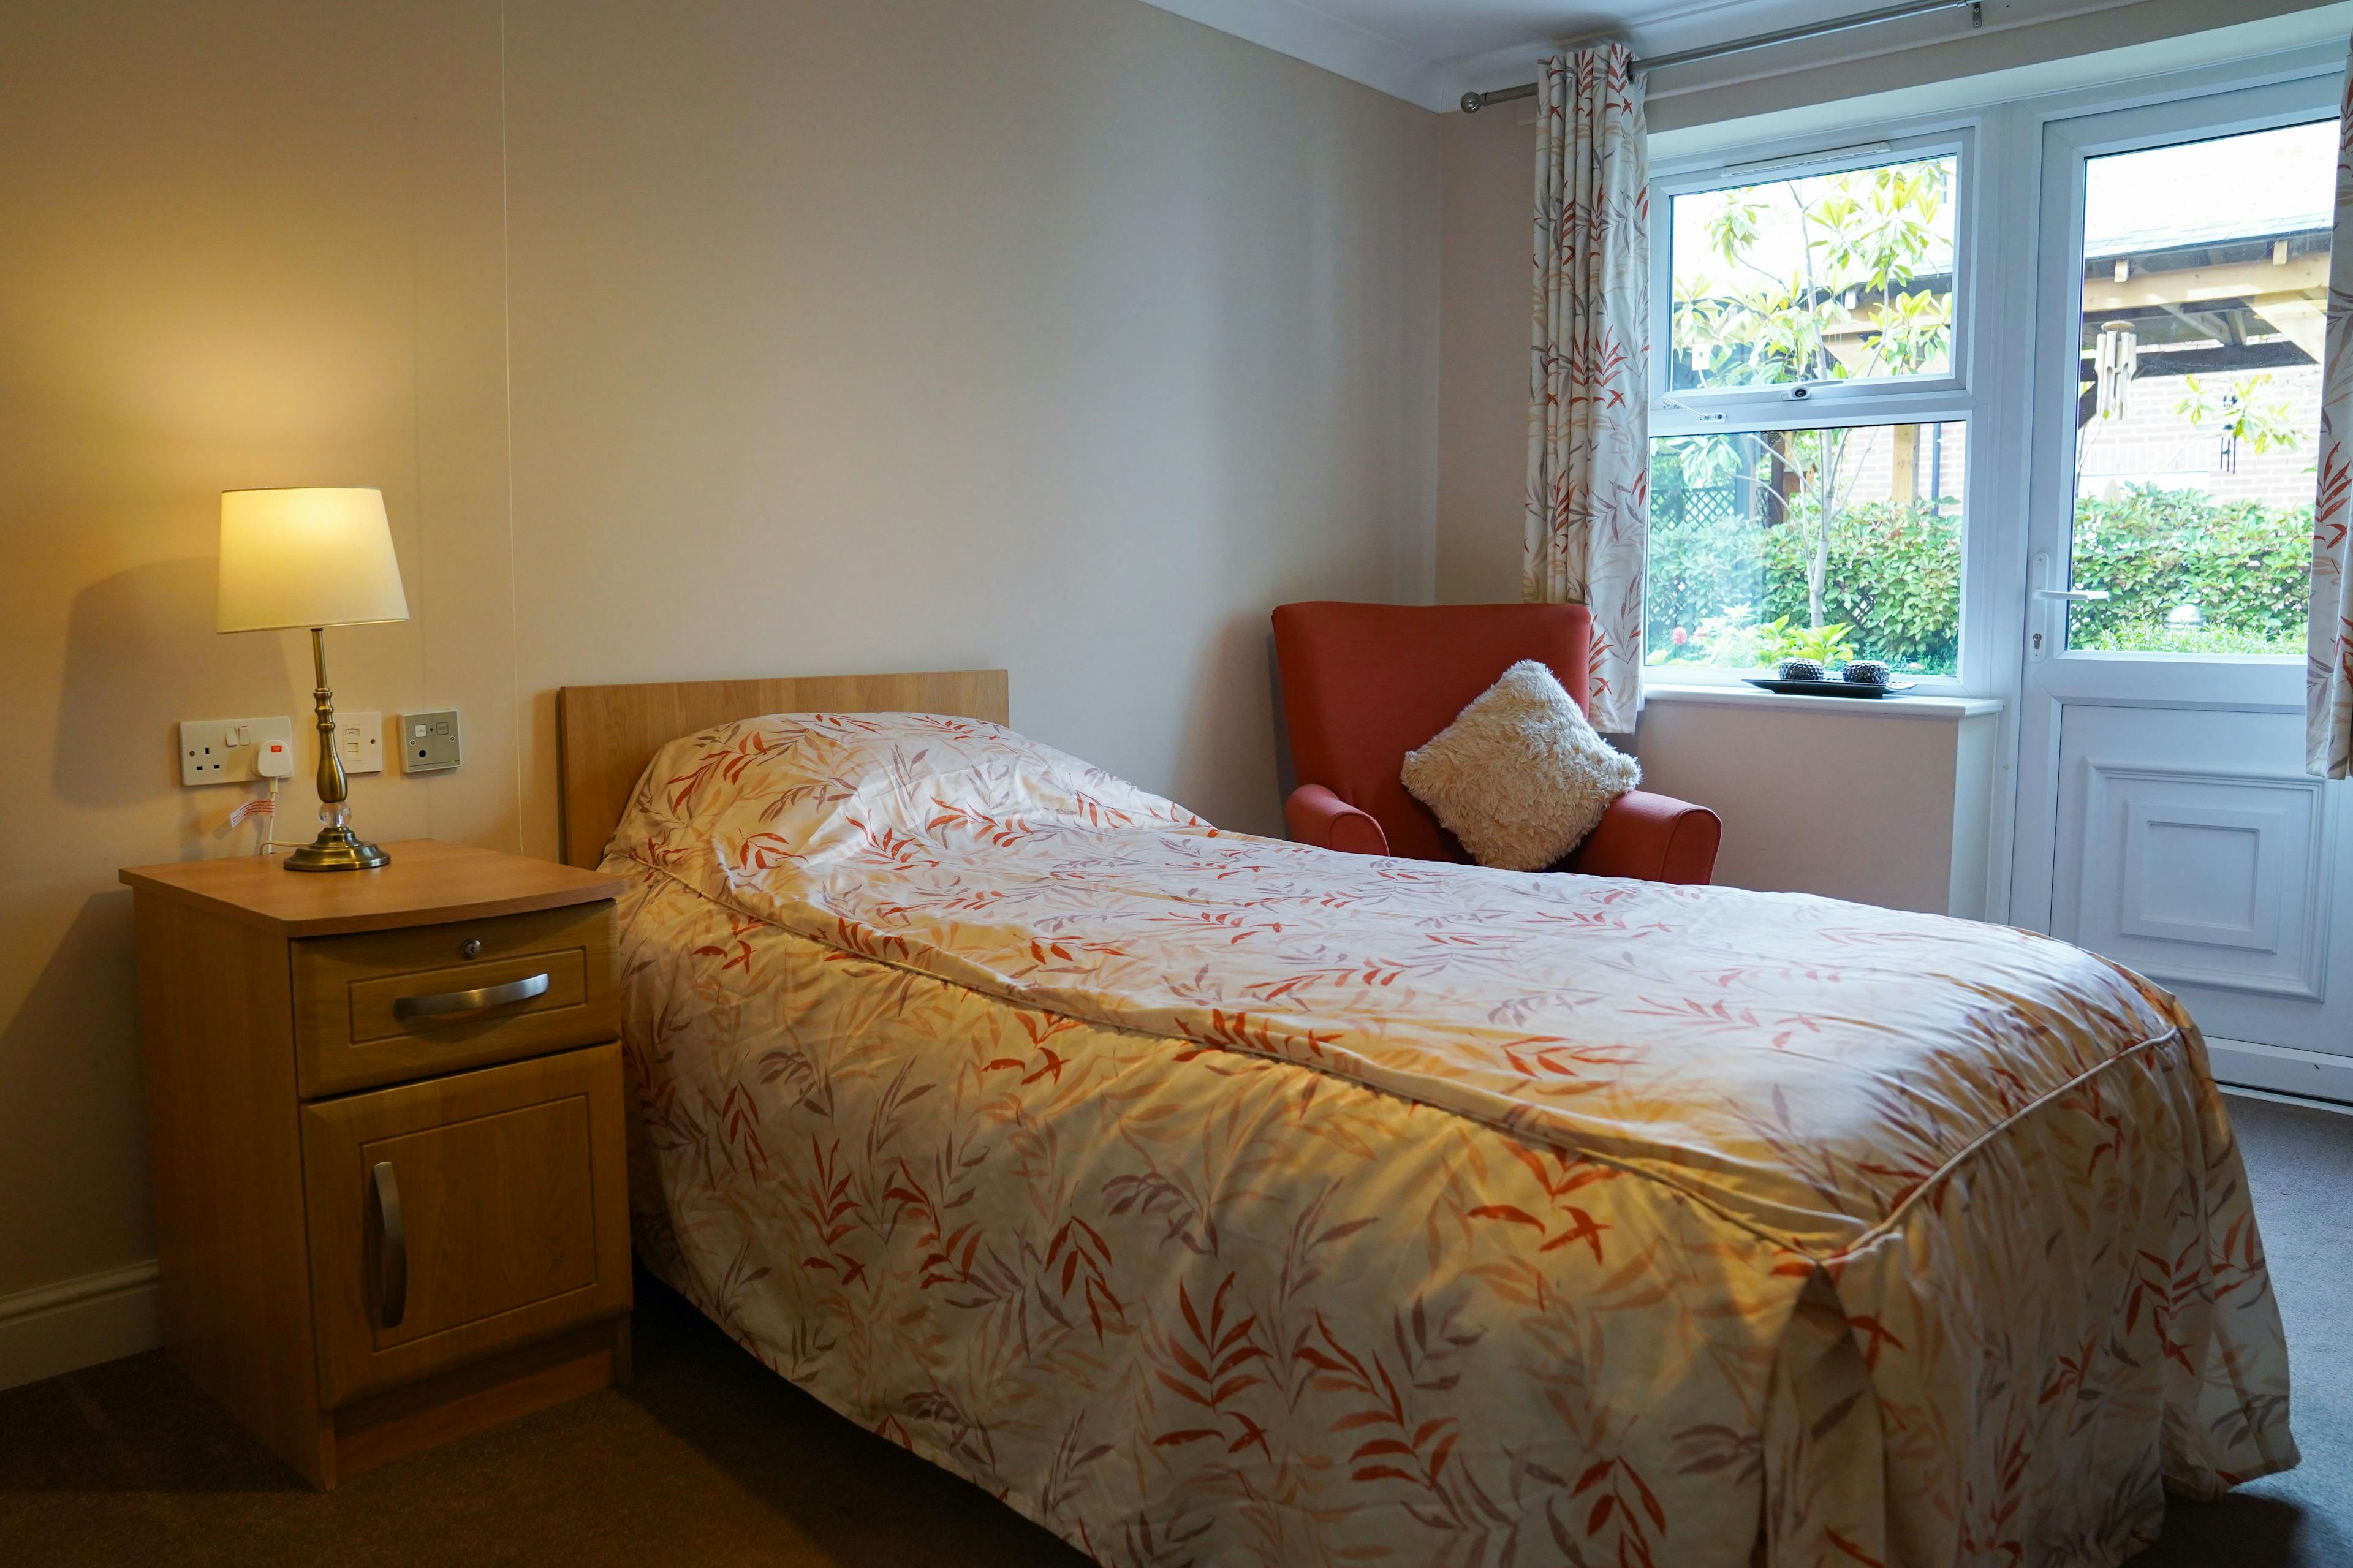 Bedroom at The Beeches Residential Care Home, Northfield, Birmingham